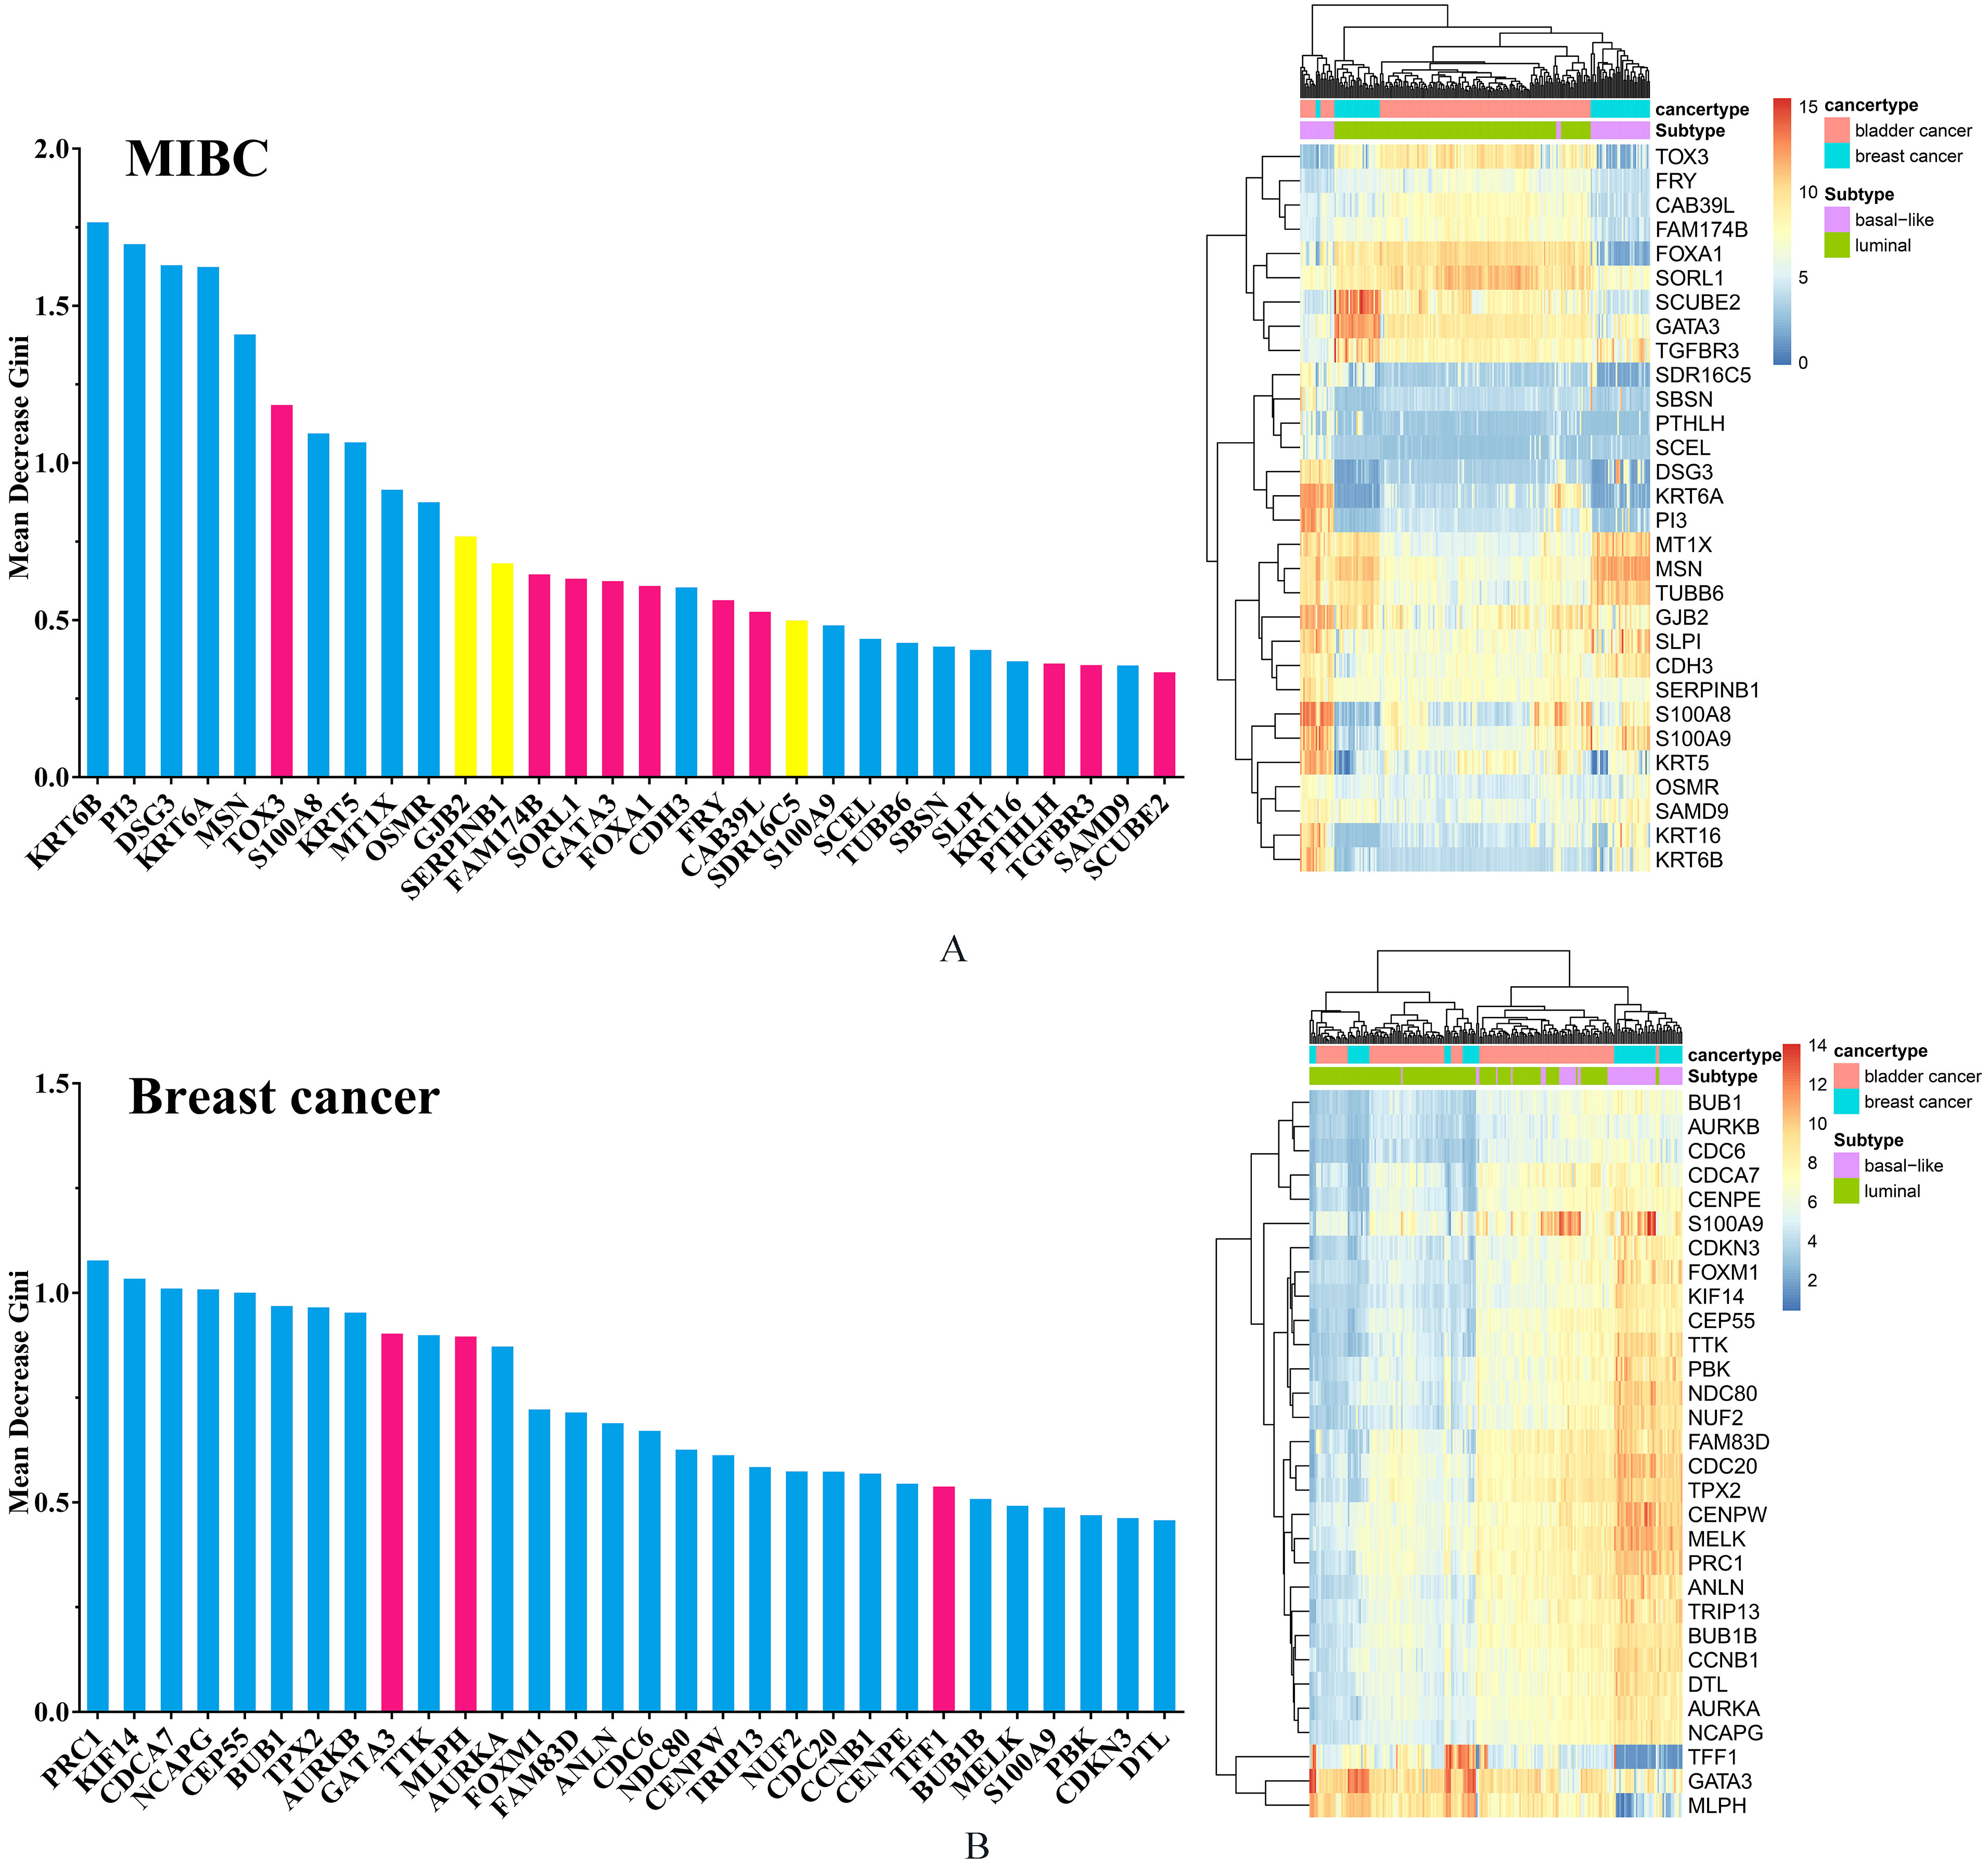 (A) The top 30 MIBC subtype-related genes with the highest MDG. Among these genes, blue bars indicate all basal-related genes whereas red bars indicate all luminal-related genes and the yellow bar indicate basal-related genes for bladder cancer but luminal-related genes for breast cancer. The right sub-graph of (A) indicates the heatmap of top 30 MIBC subtype-related genes with the highest MDG in two cancers. (B) The top 30 breast cancer subtype-related genes with the highest MDG. Among these genes, blue bars indicate all basal-related genes whereas red bars indicate all luminal-related genes. The right sub-graph of (B) indicates the heatmap of top 30 breast cancer subtype-related genes with the highest MDG in two cancers.